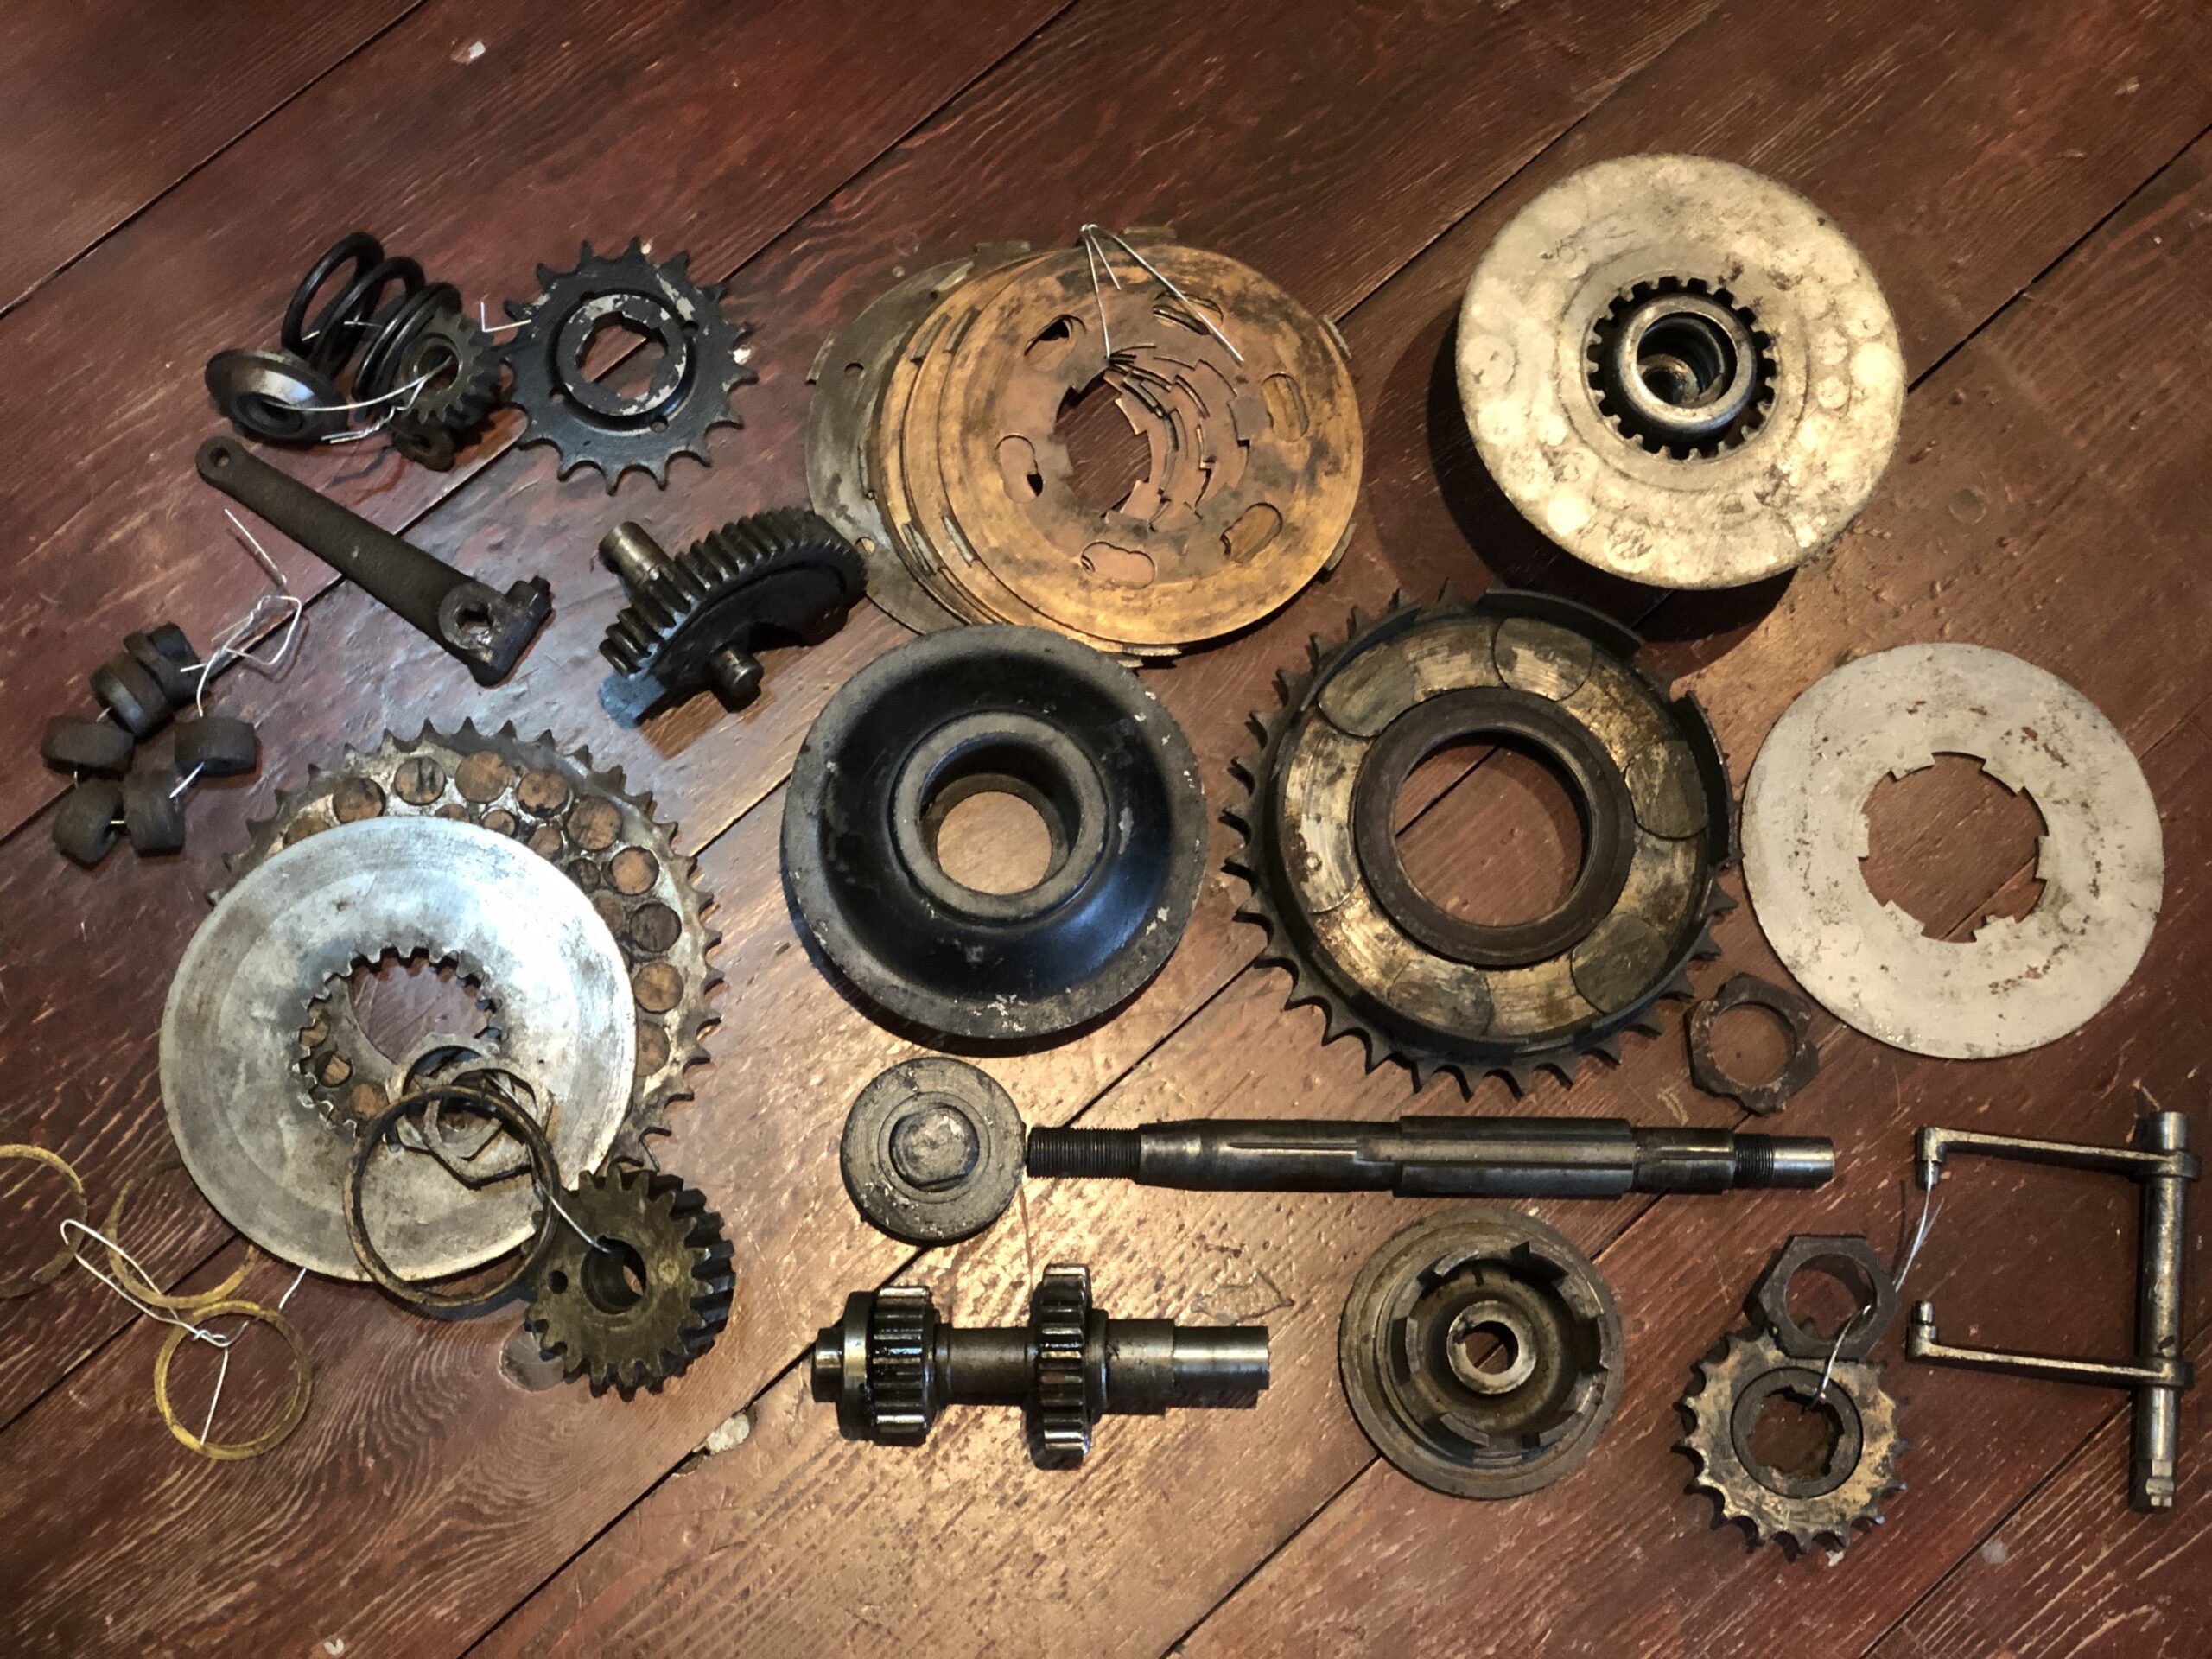 1920s James V-Twin motorcycle clutch & gearbox components. Model 12 James twin vintage motorbike parts for sale. James clutch parts & gearbox spares